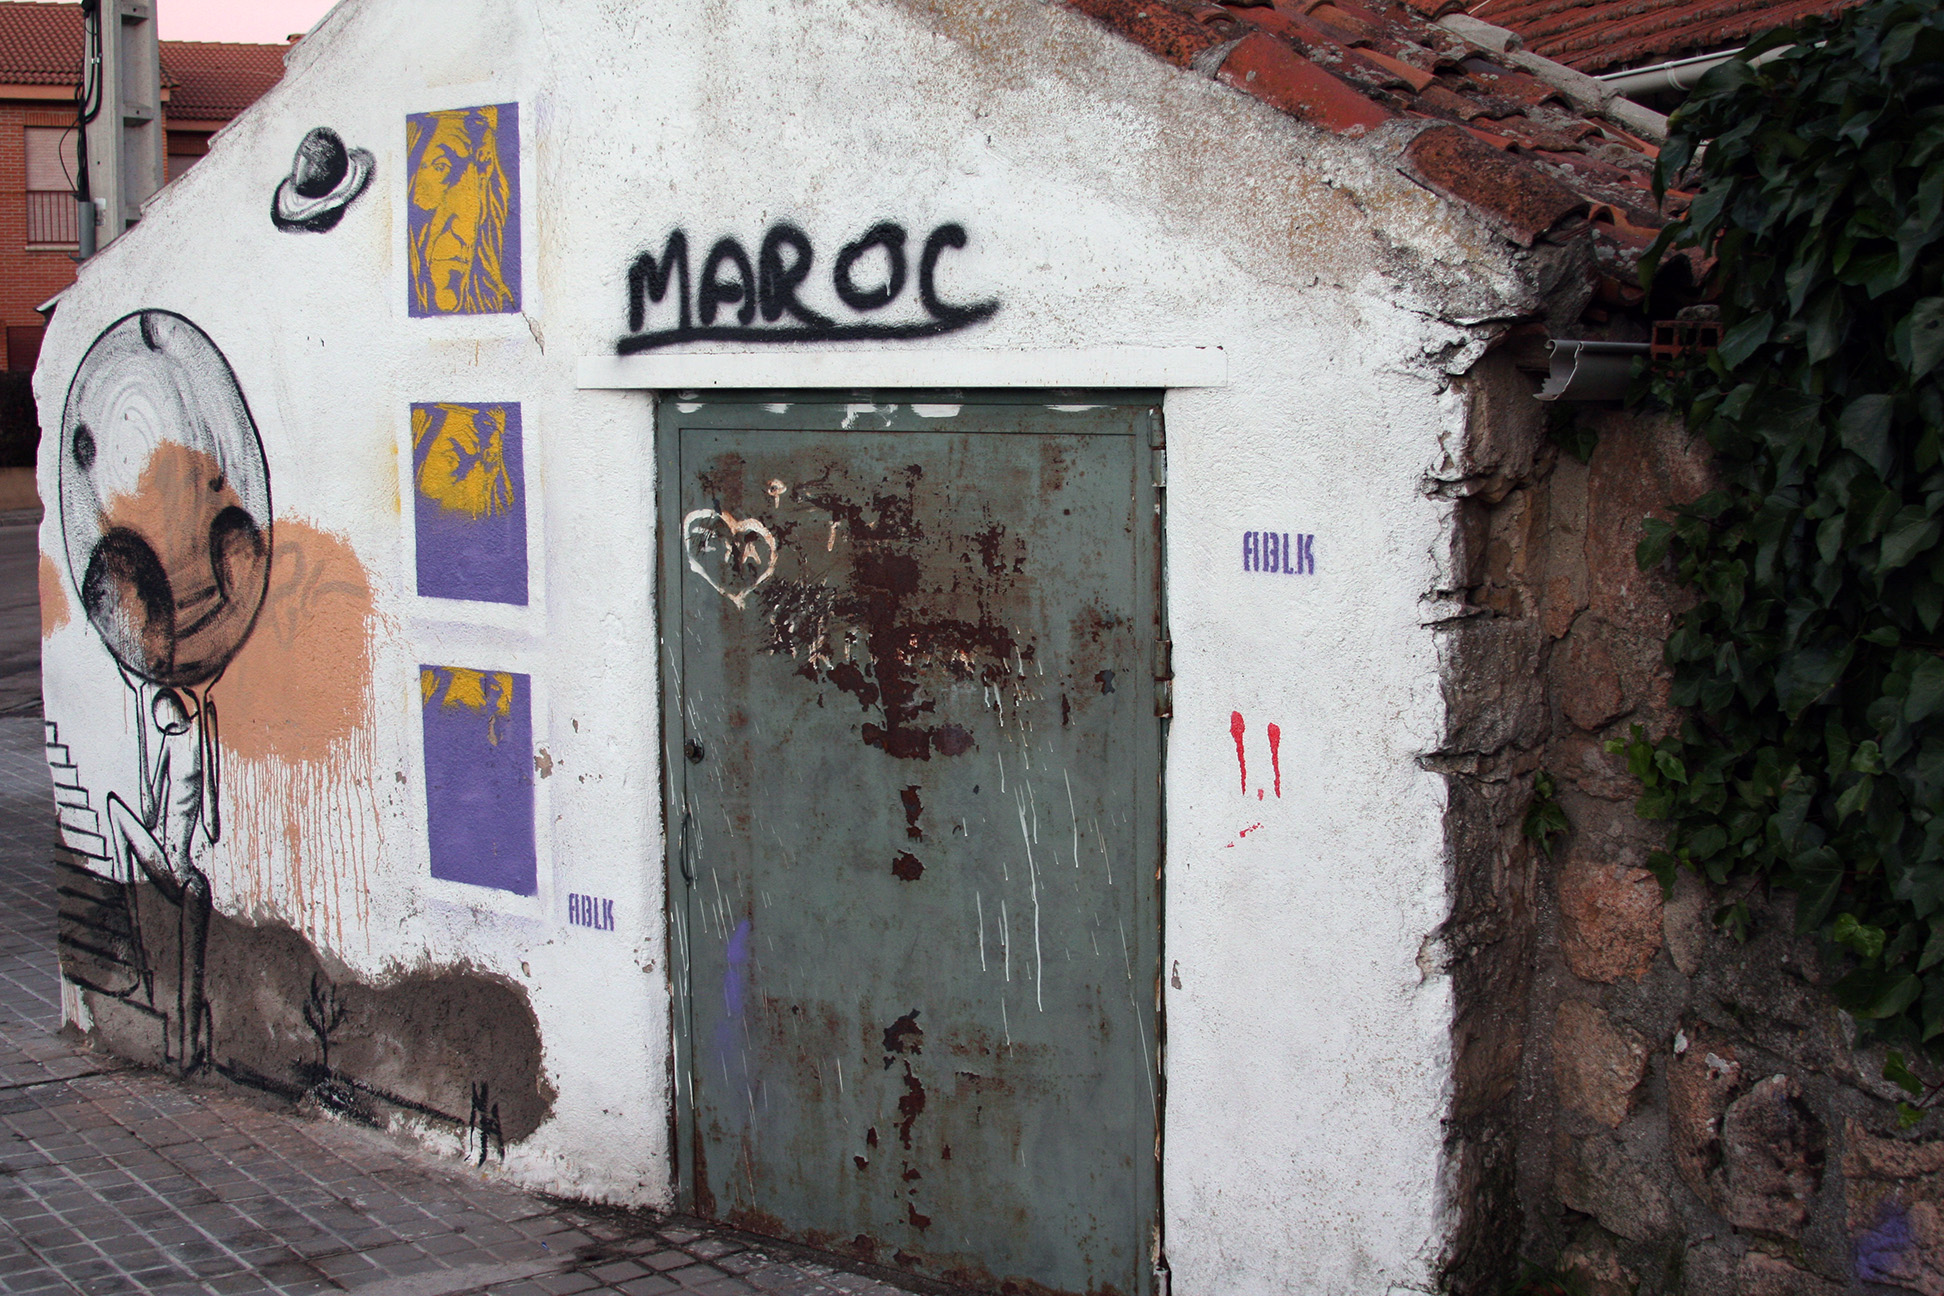 A small whitewashed building covered in graffiti